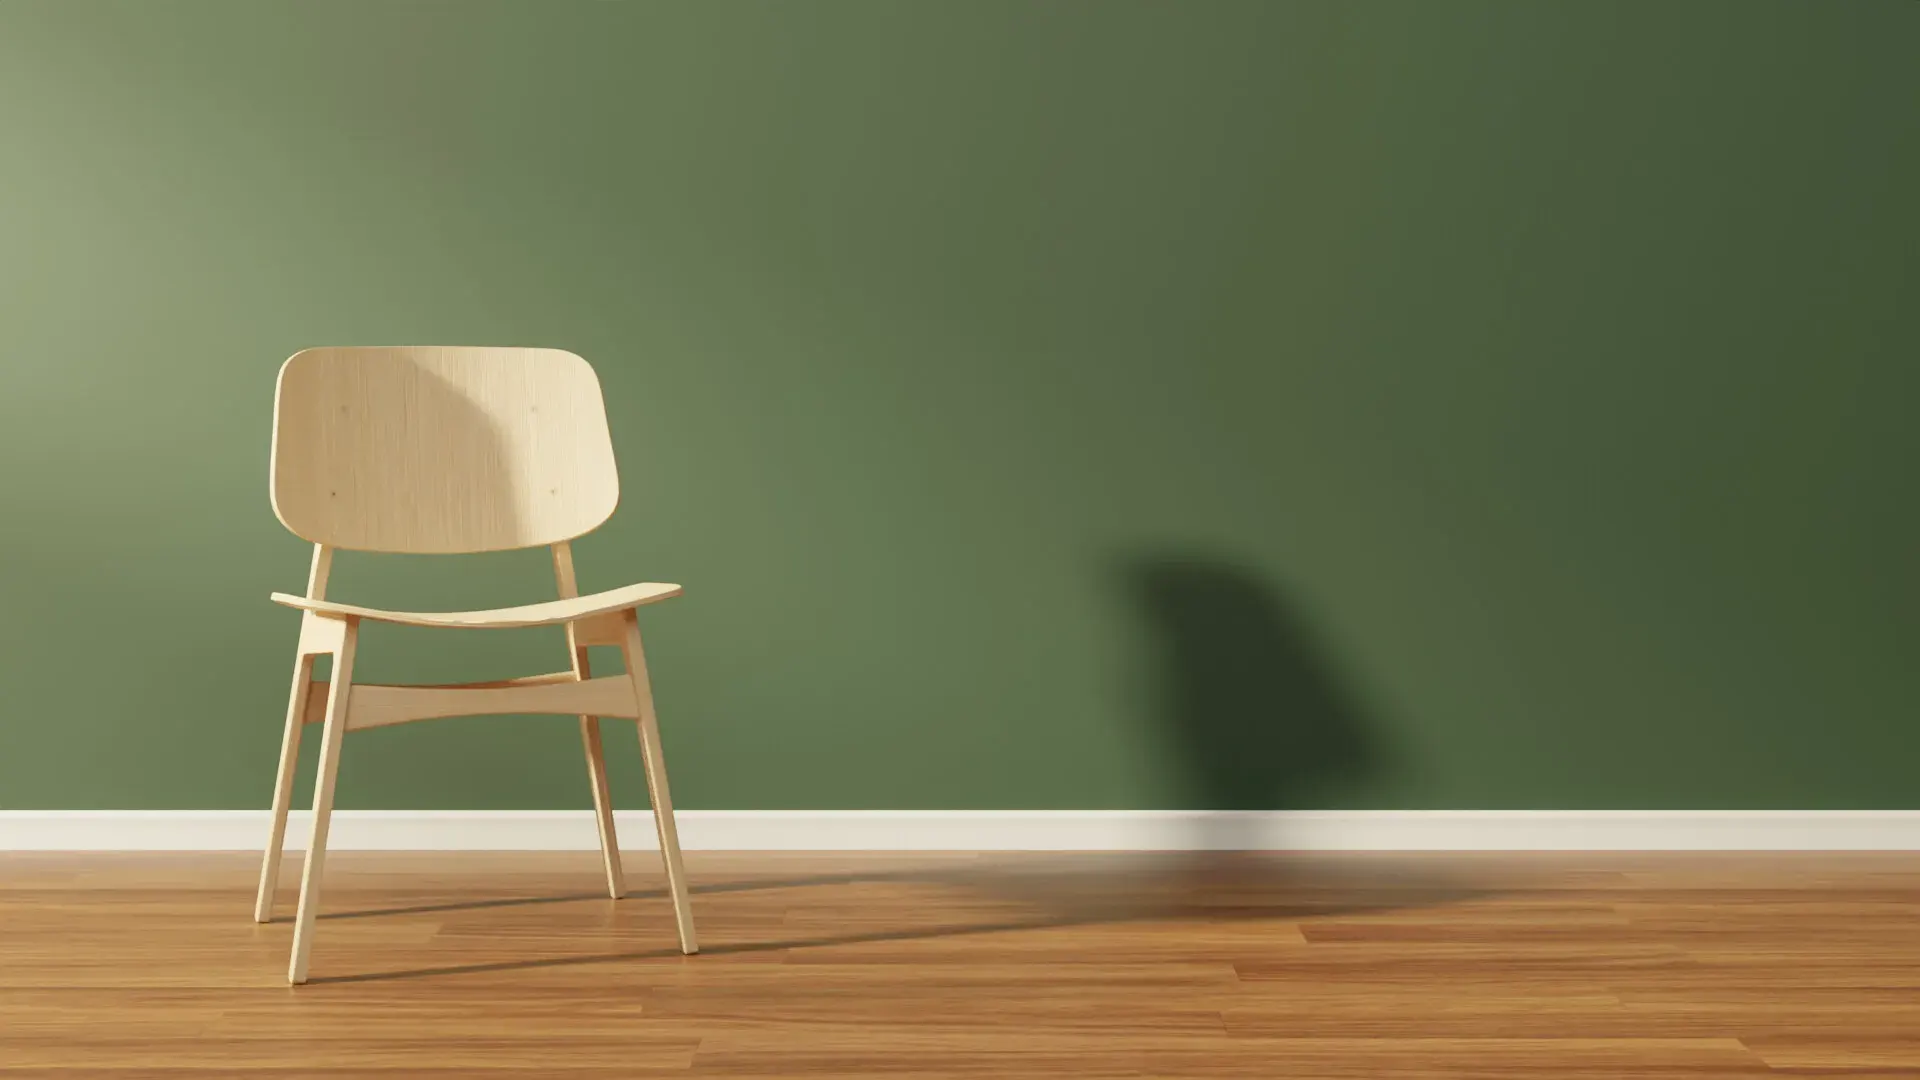 Render of a chair